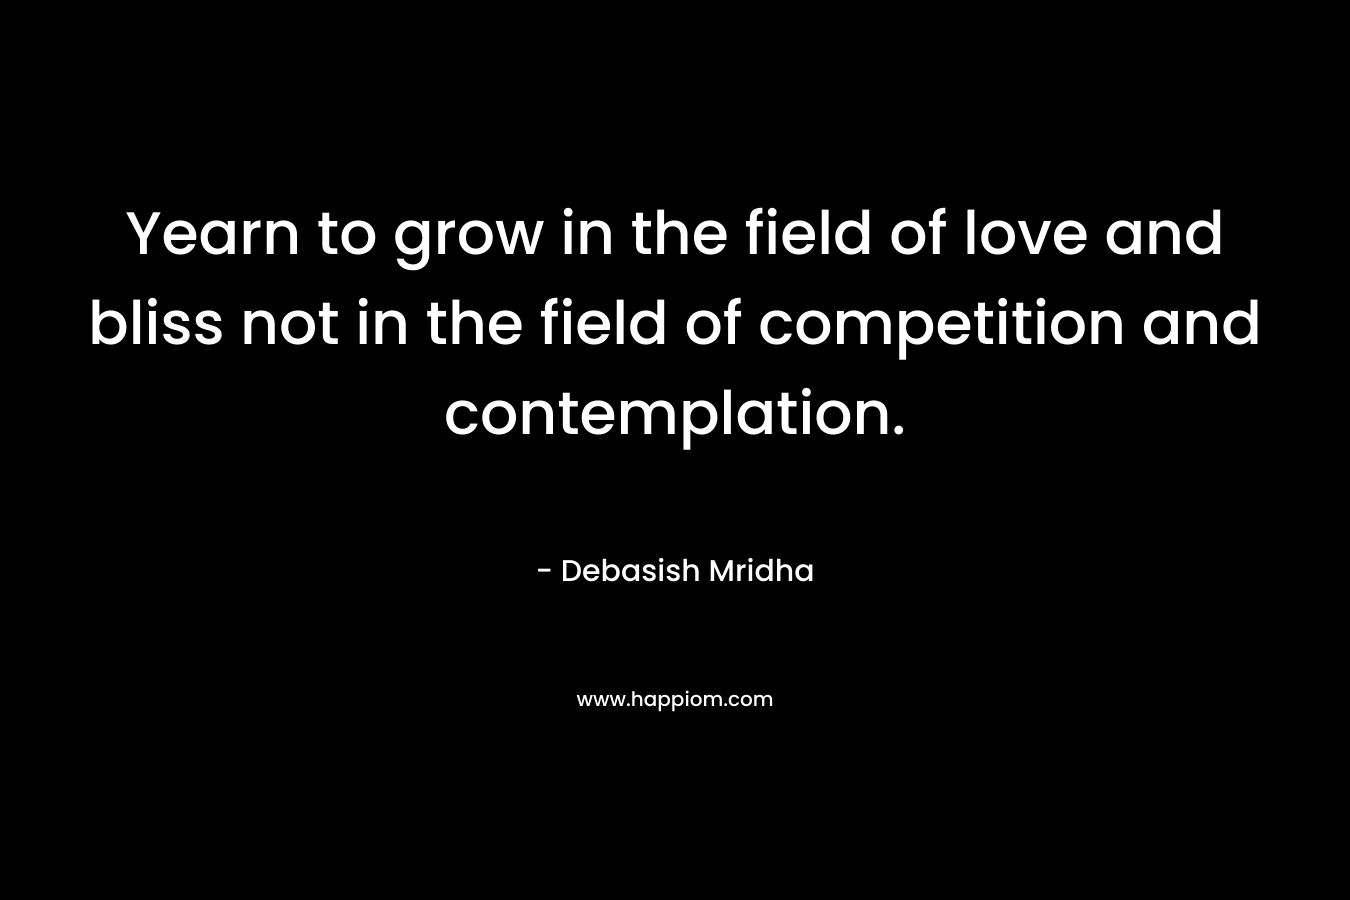 Yearn to grow in the field of love and bliss not in the field of competition and contemplation.